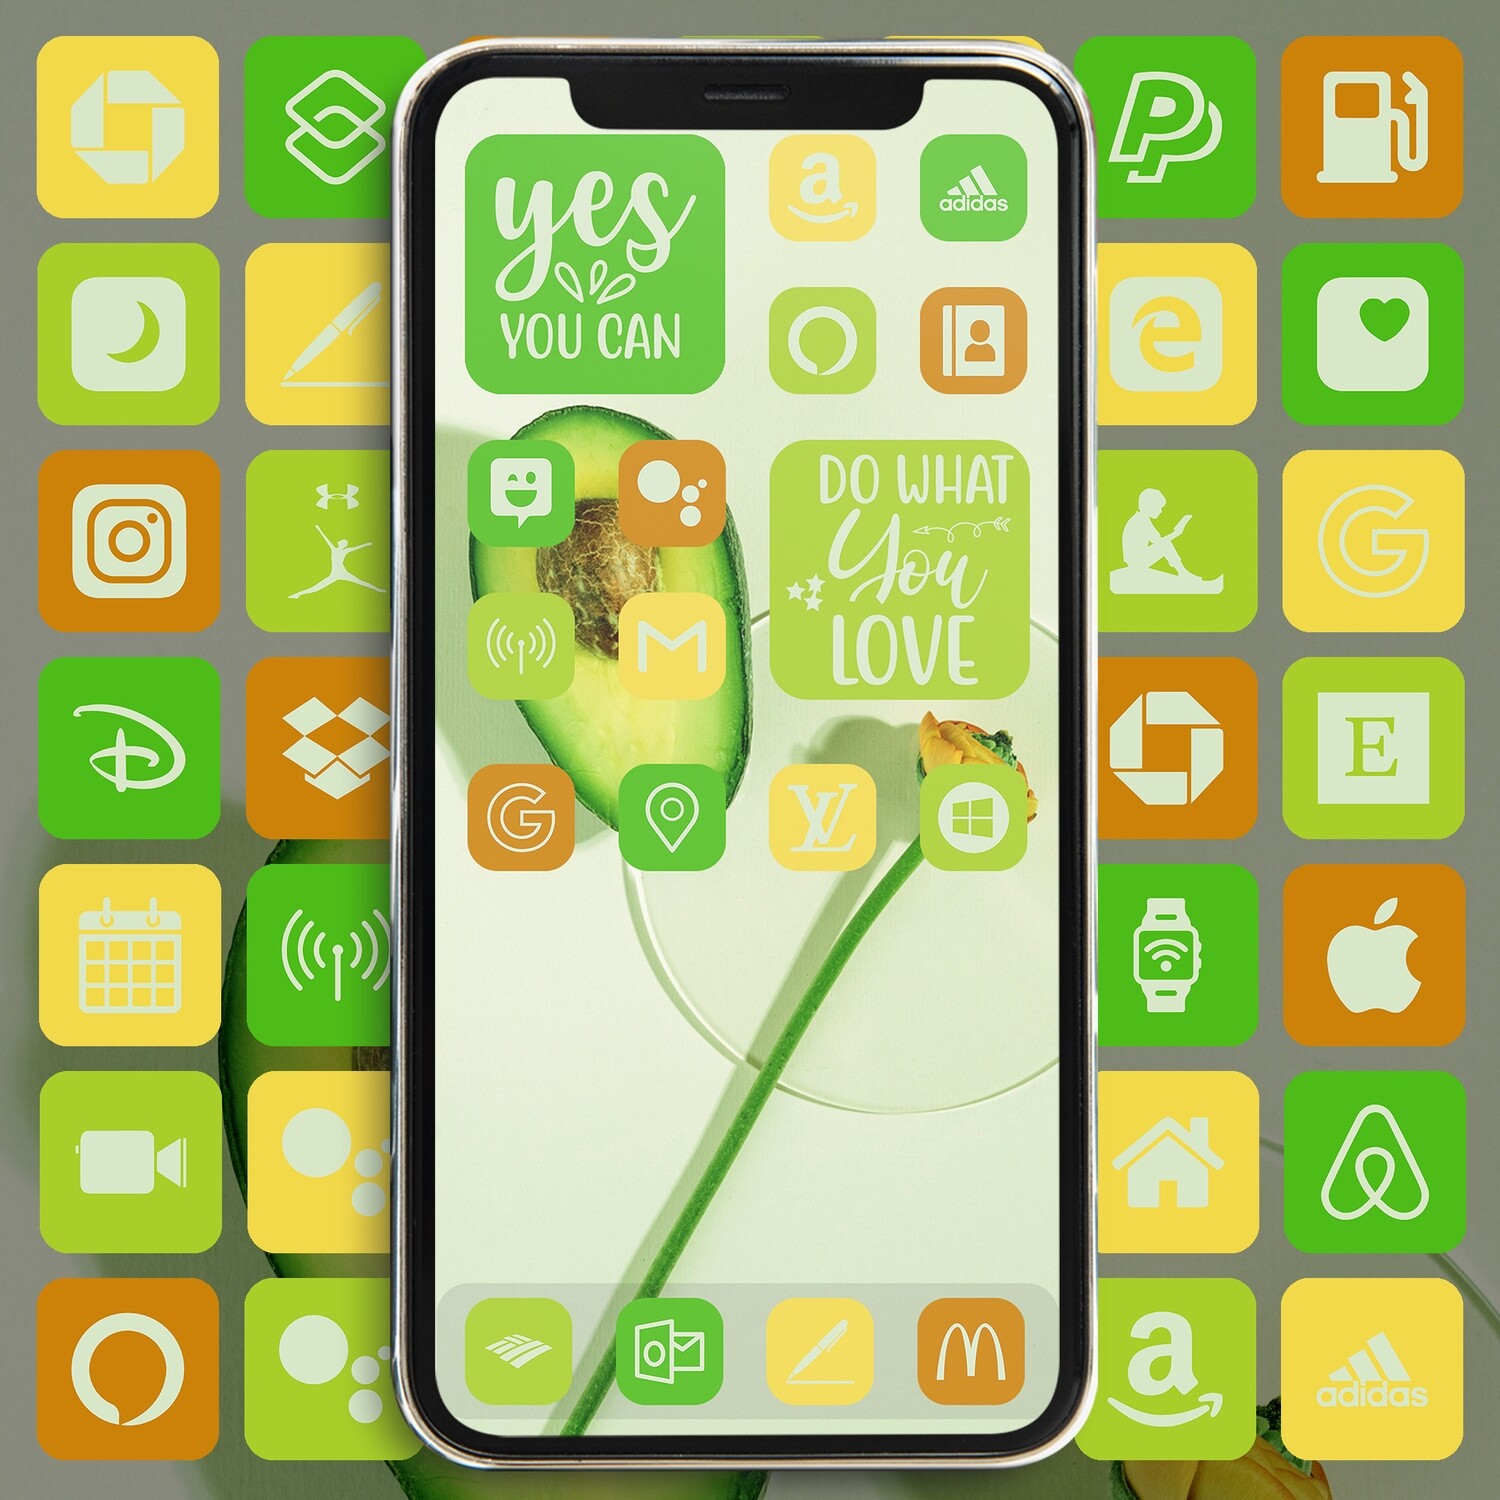 Kelly Green Color app icons ios 15 icons aesthetic